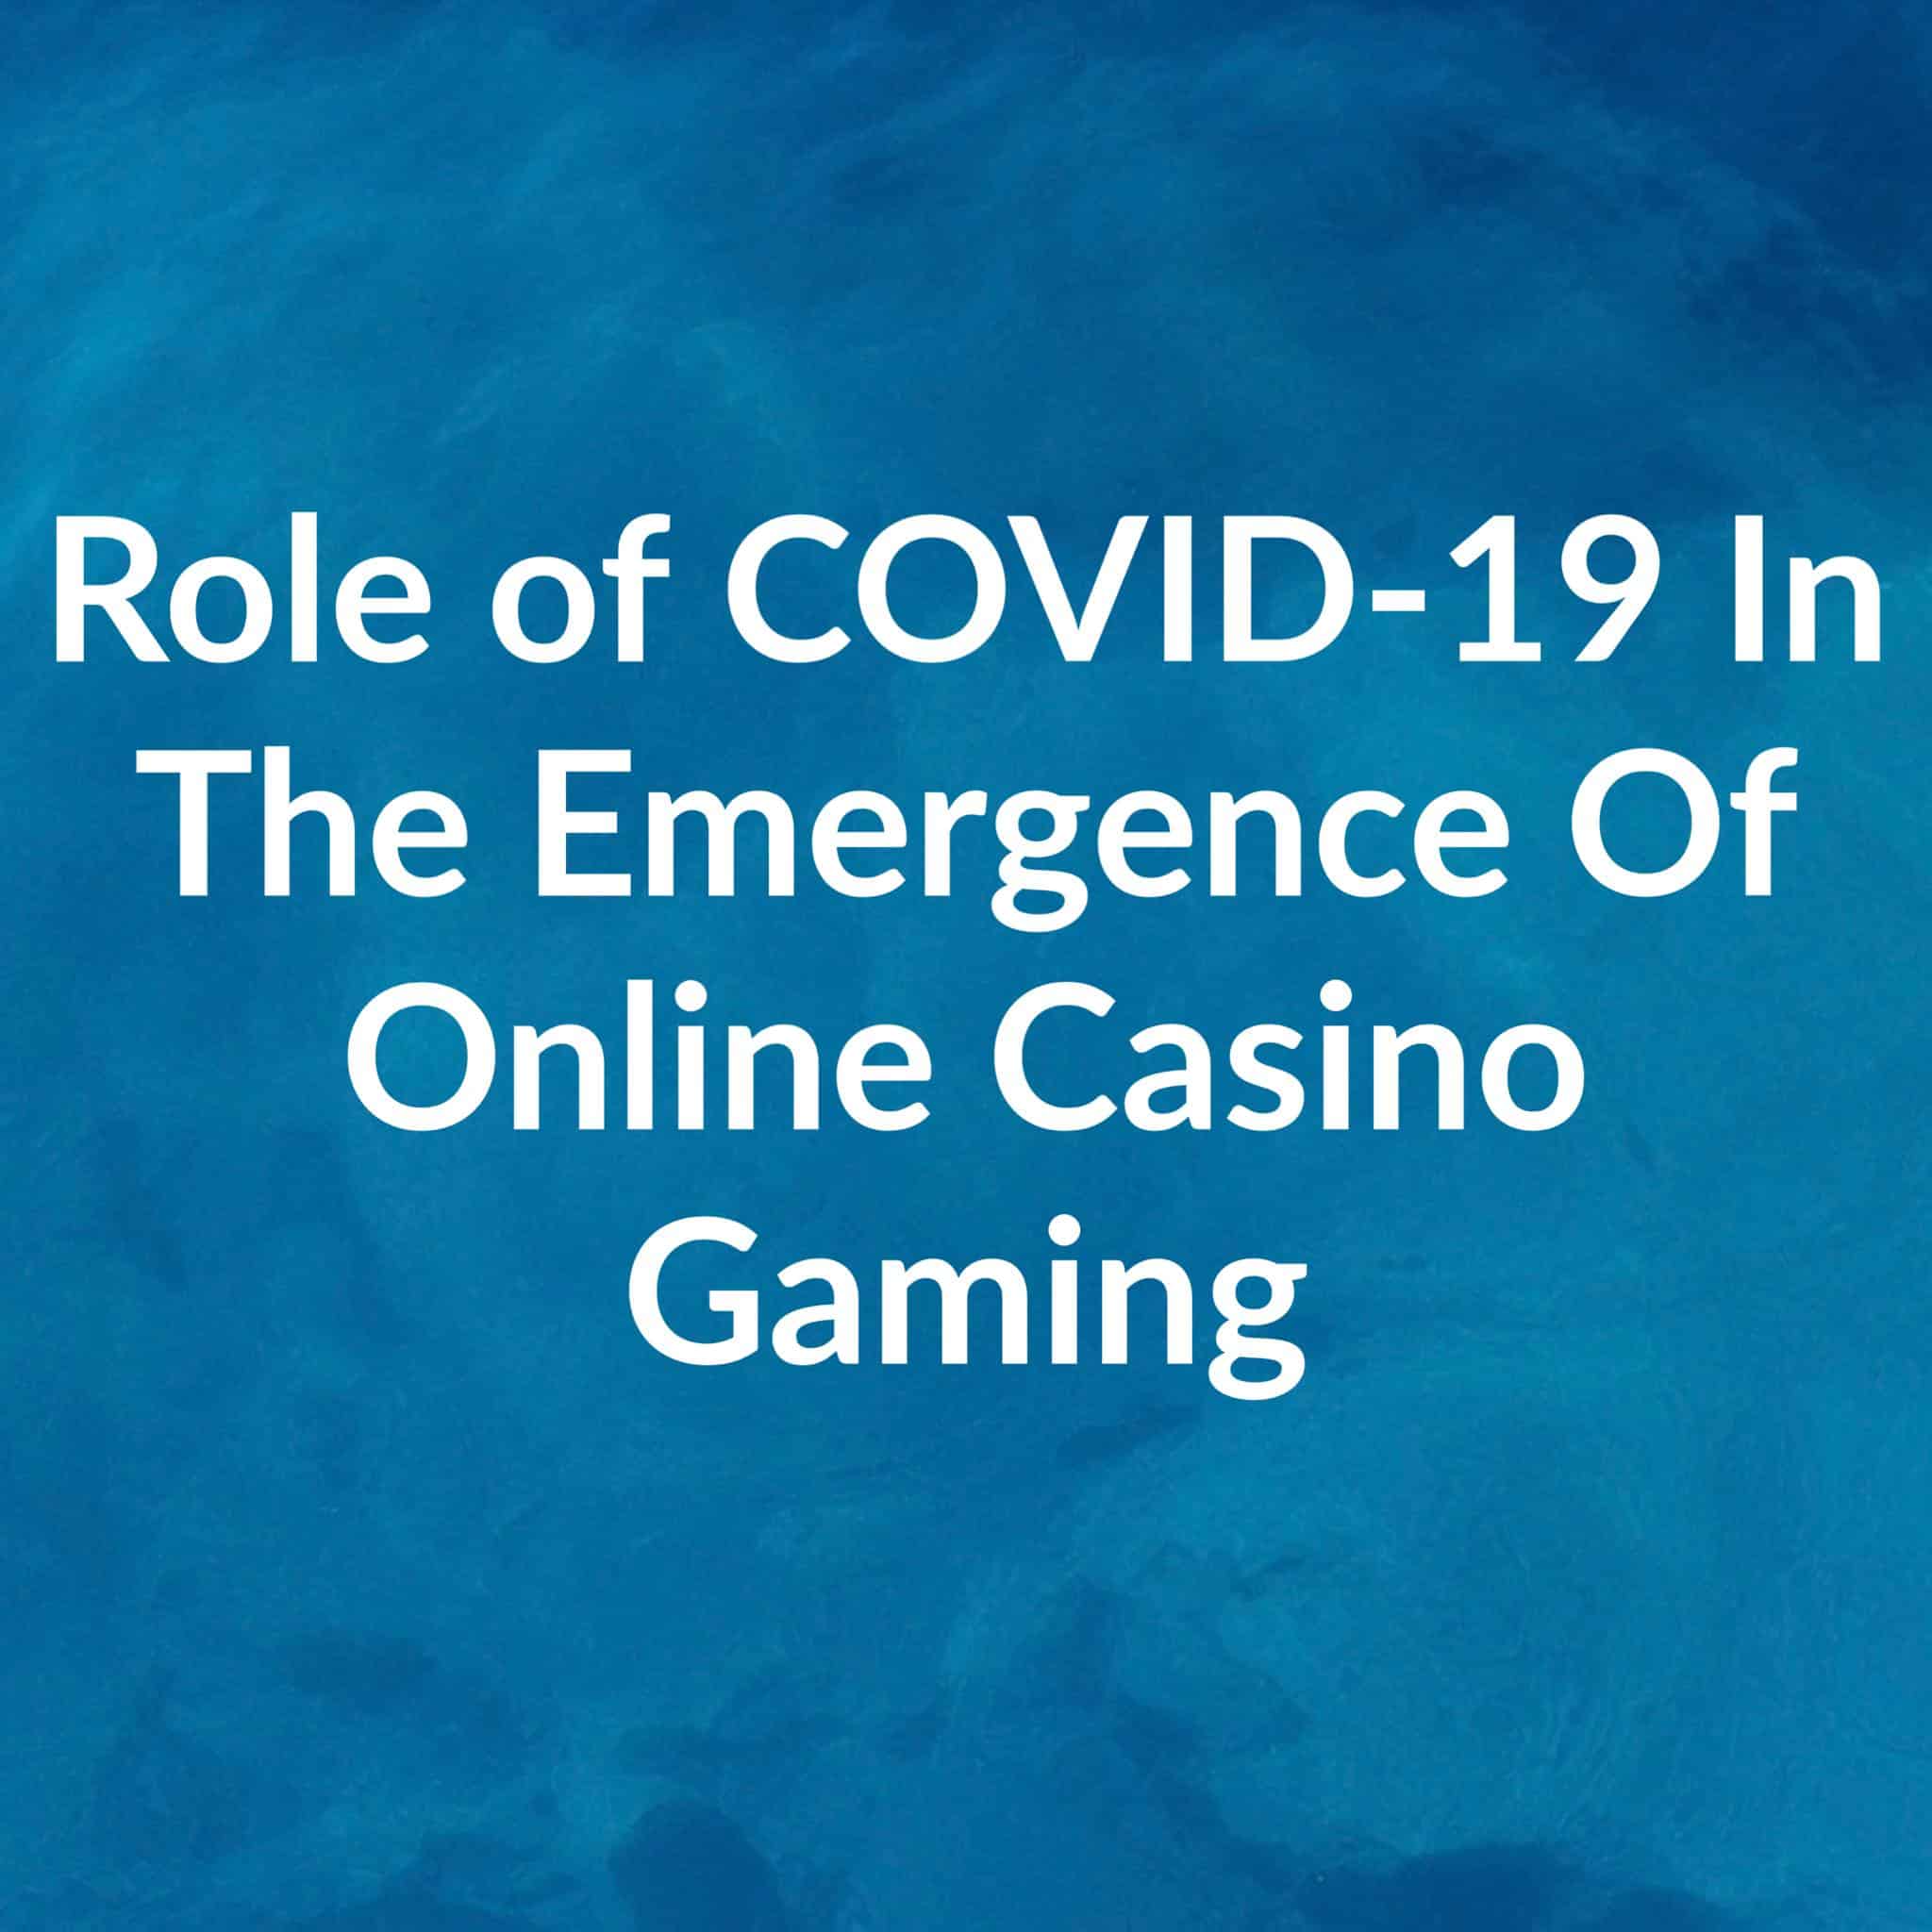 role of covid-19 in the emergence of online casino gaming